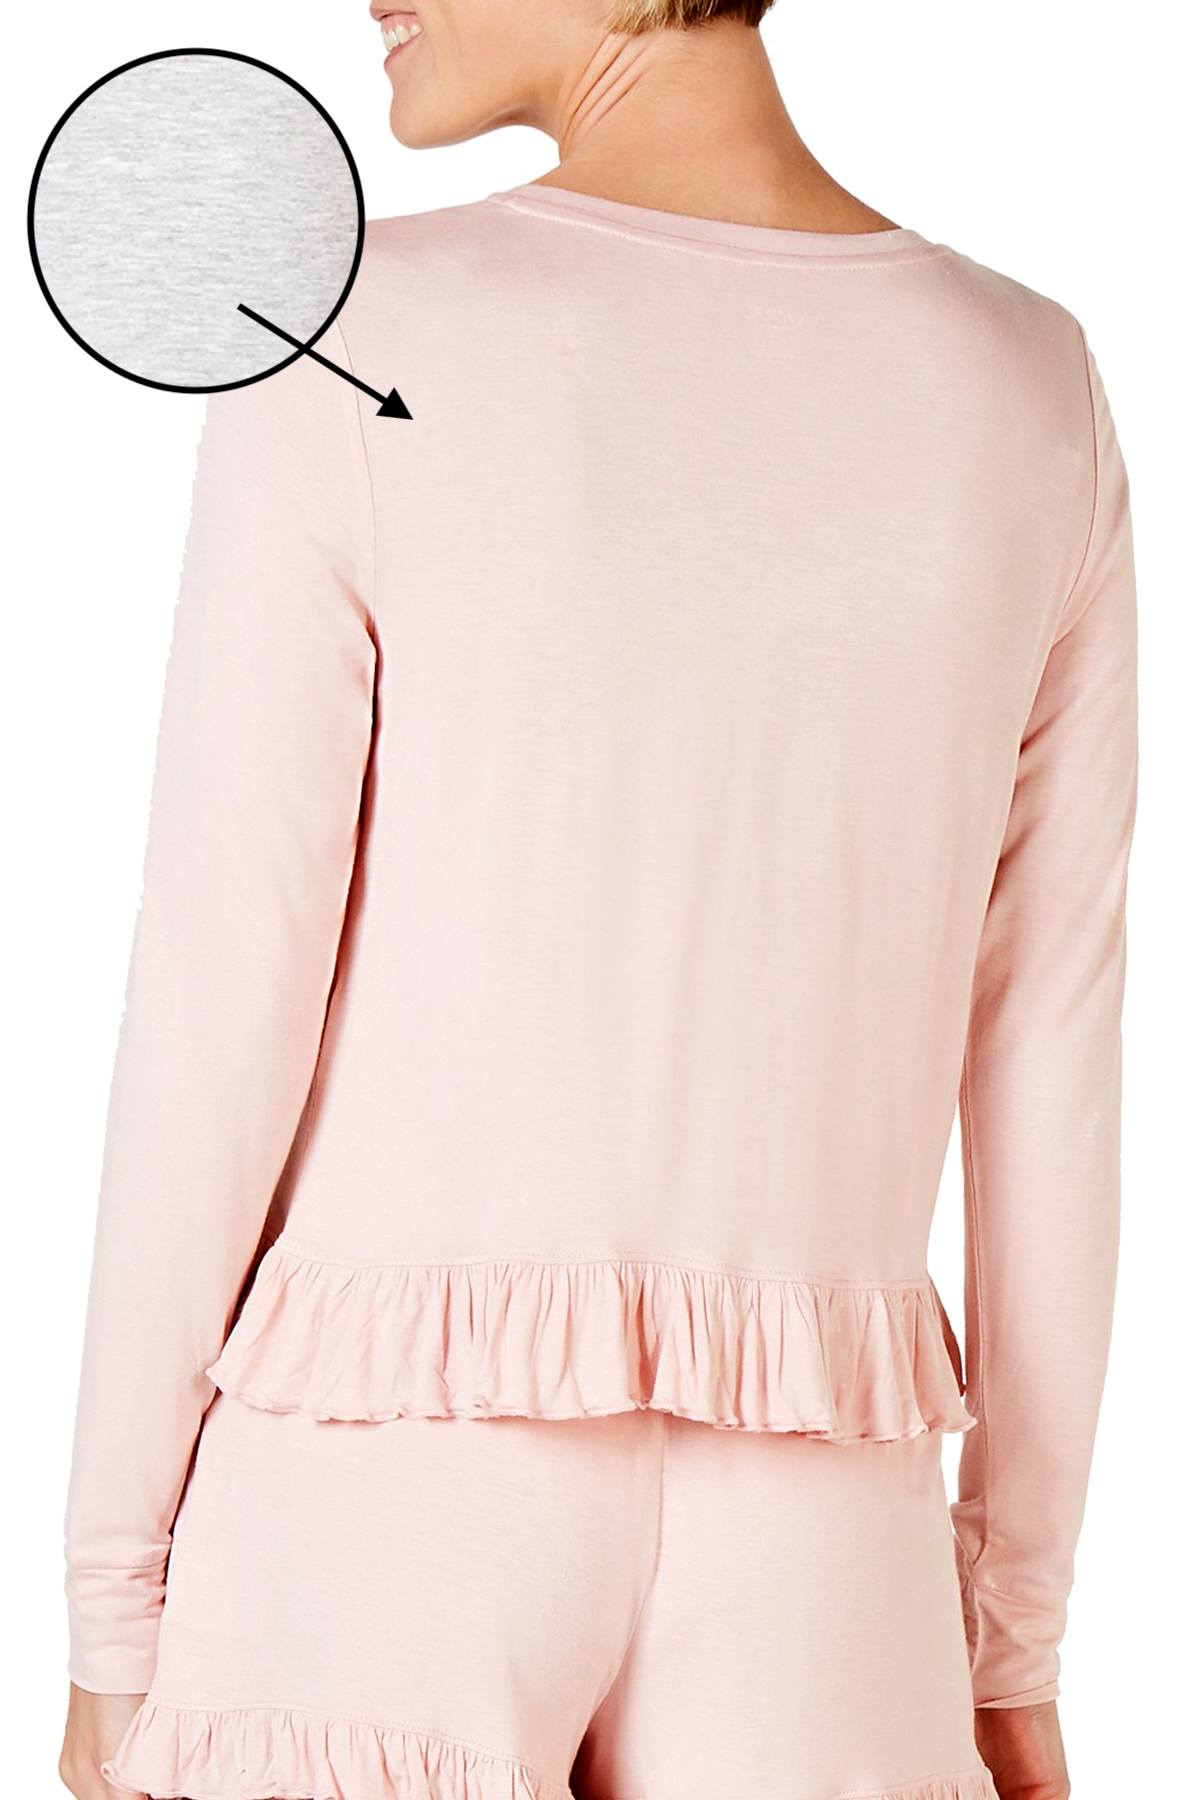 Jenni Ruffled Ultra Soft Knit Lounge Top in Maybe Later Heather Grey